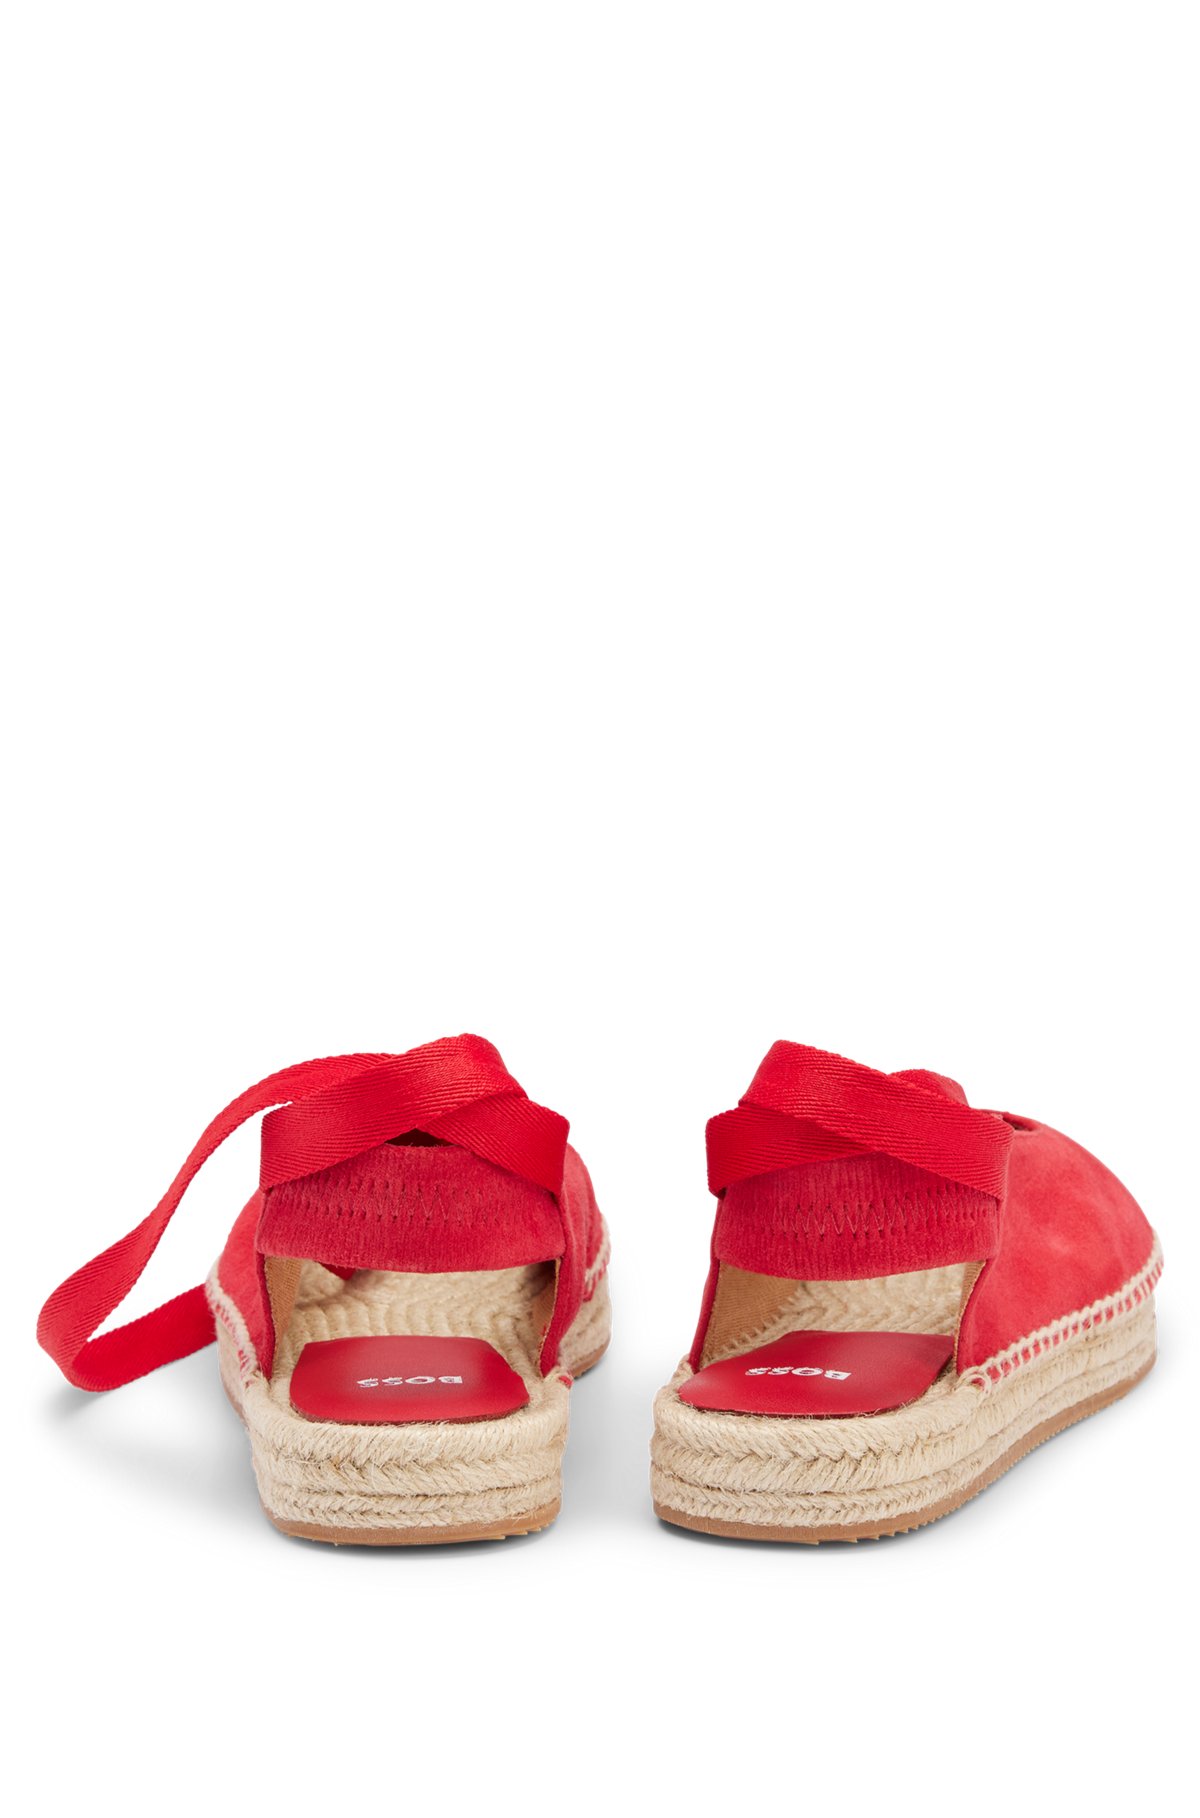 Goat-suede ballerina espadrilles with ankle ties, Light Red